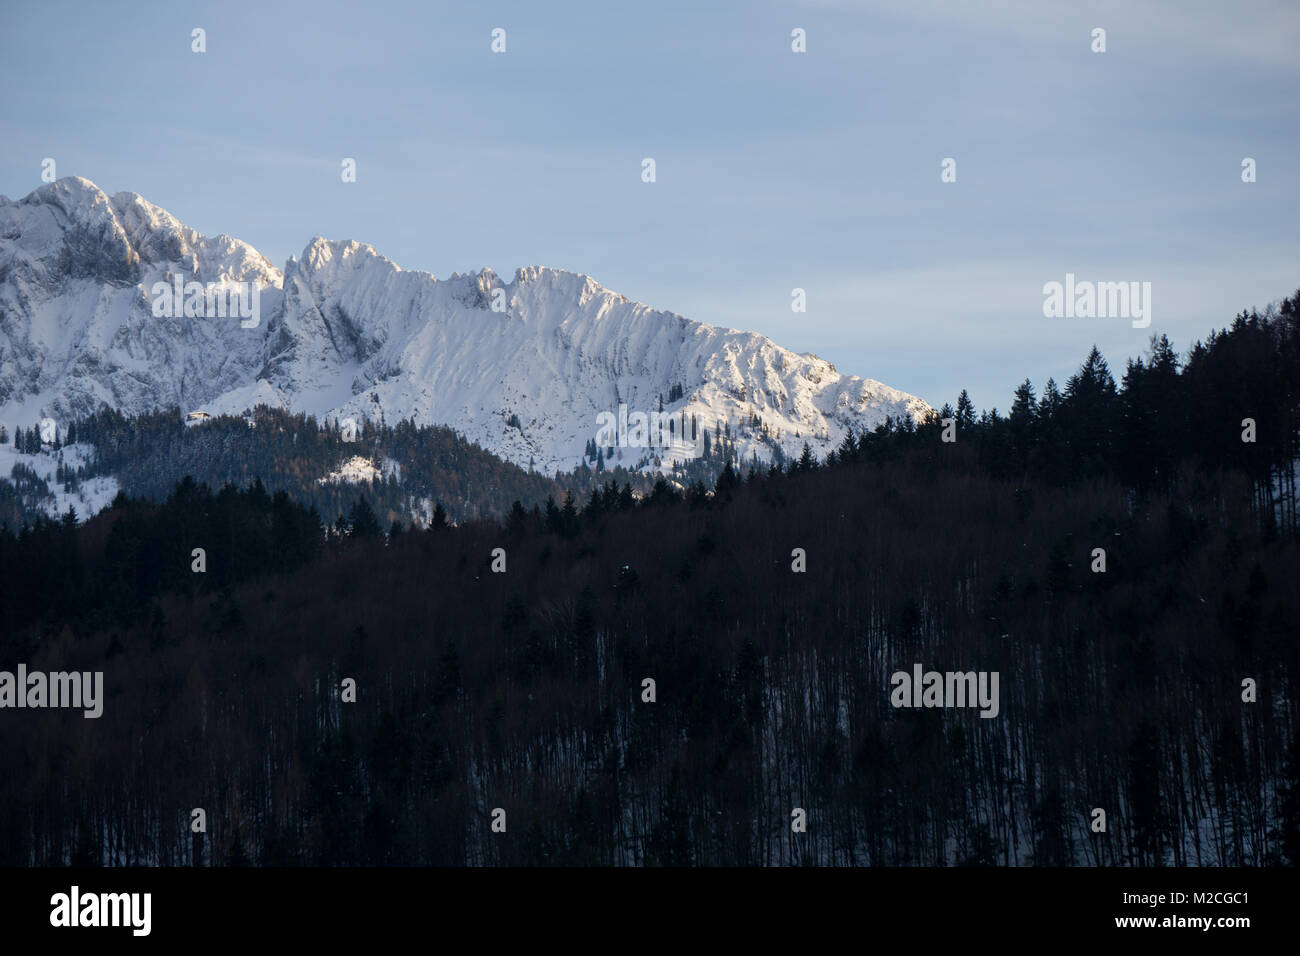 Leafless forest in the foreground with rugged mountain range in the background Stock Photo